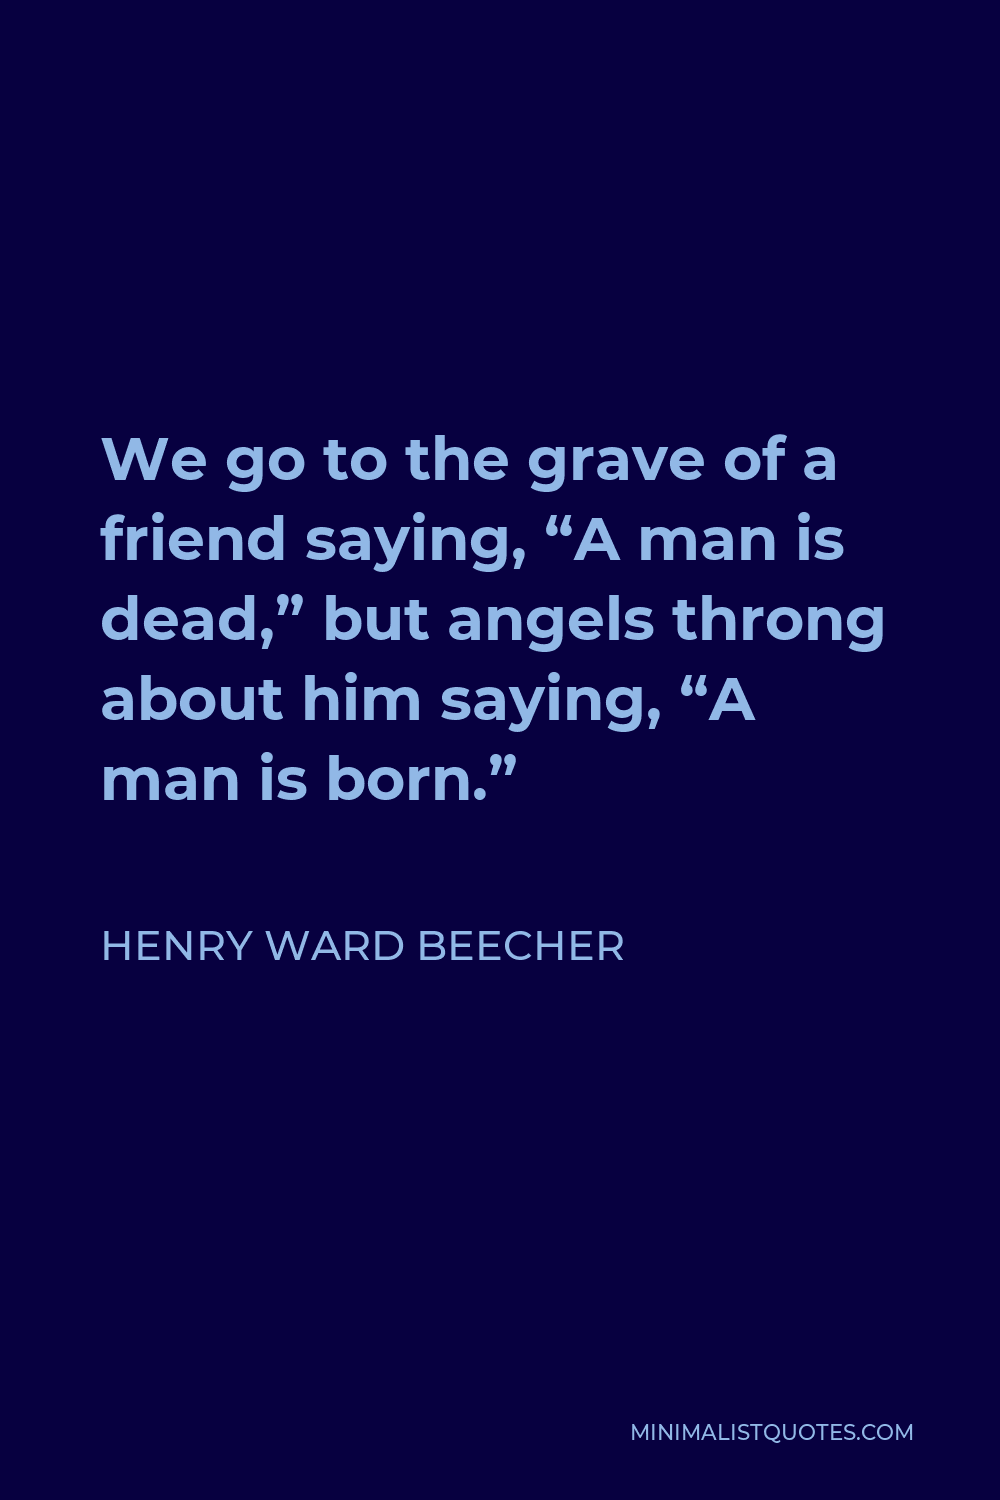 Henry Ward Beecher Quote - We go to the grave of a friend saying, “A man is dead,” but angels throng about him saying, “A man is born.”